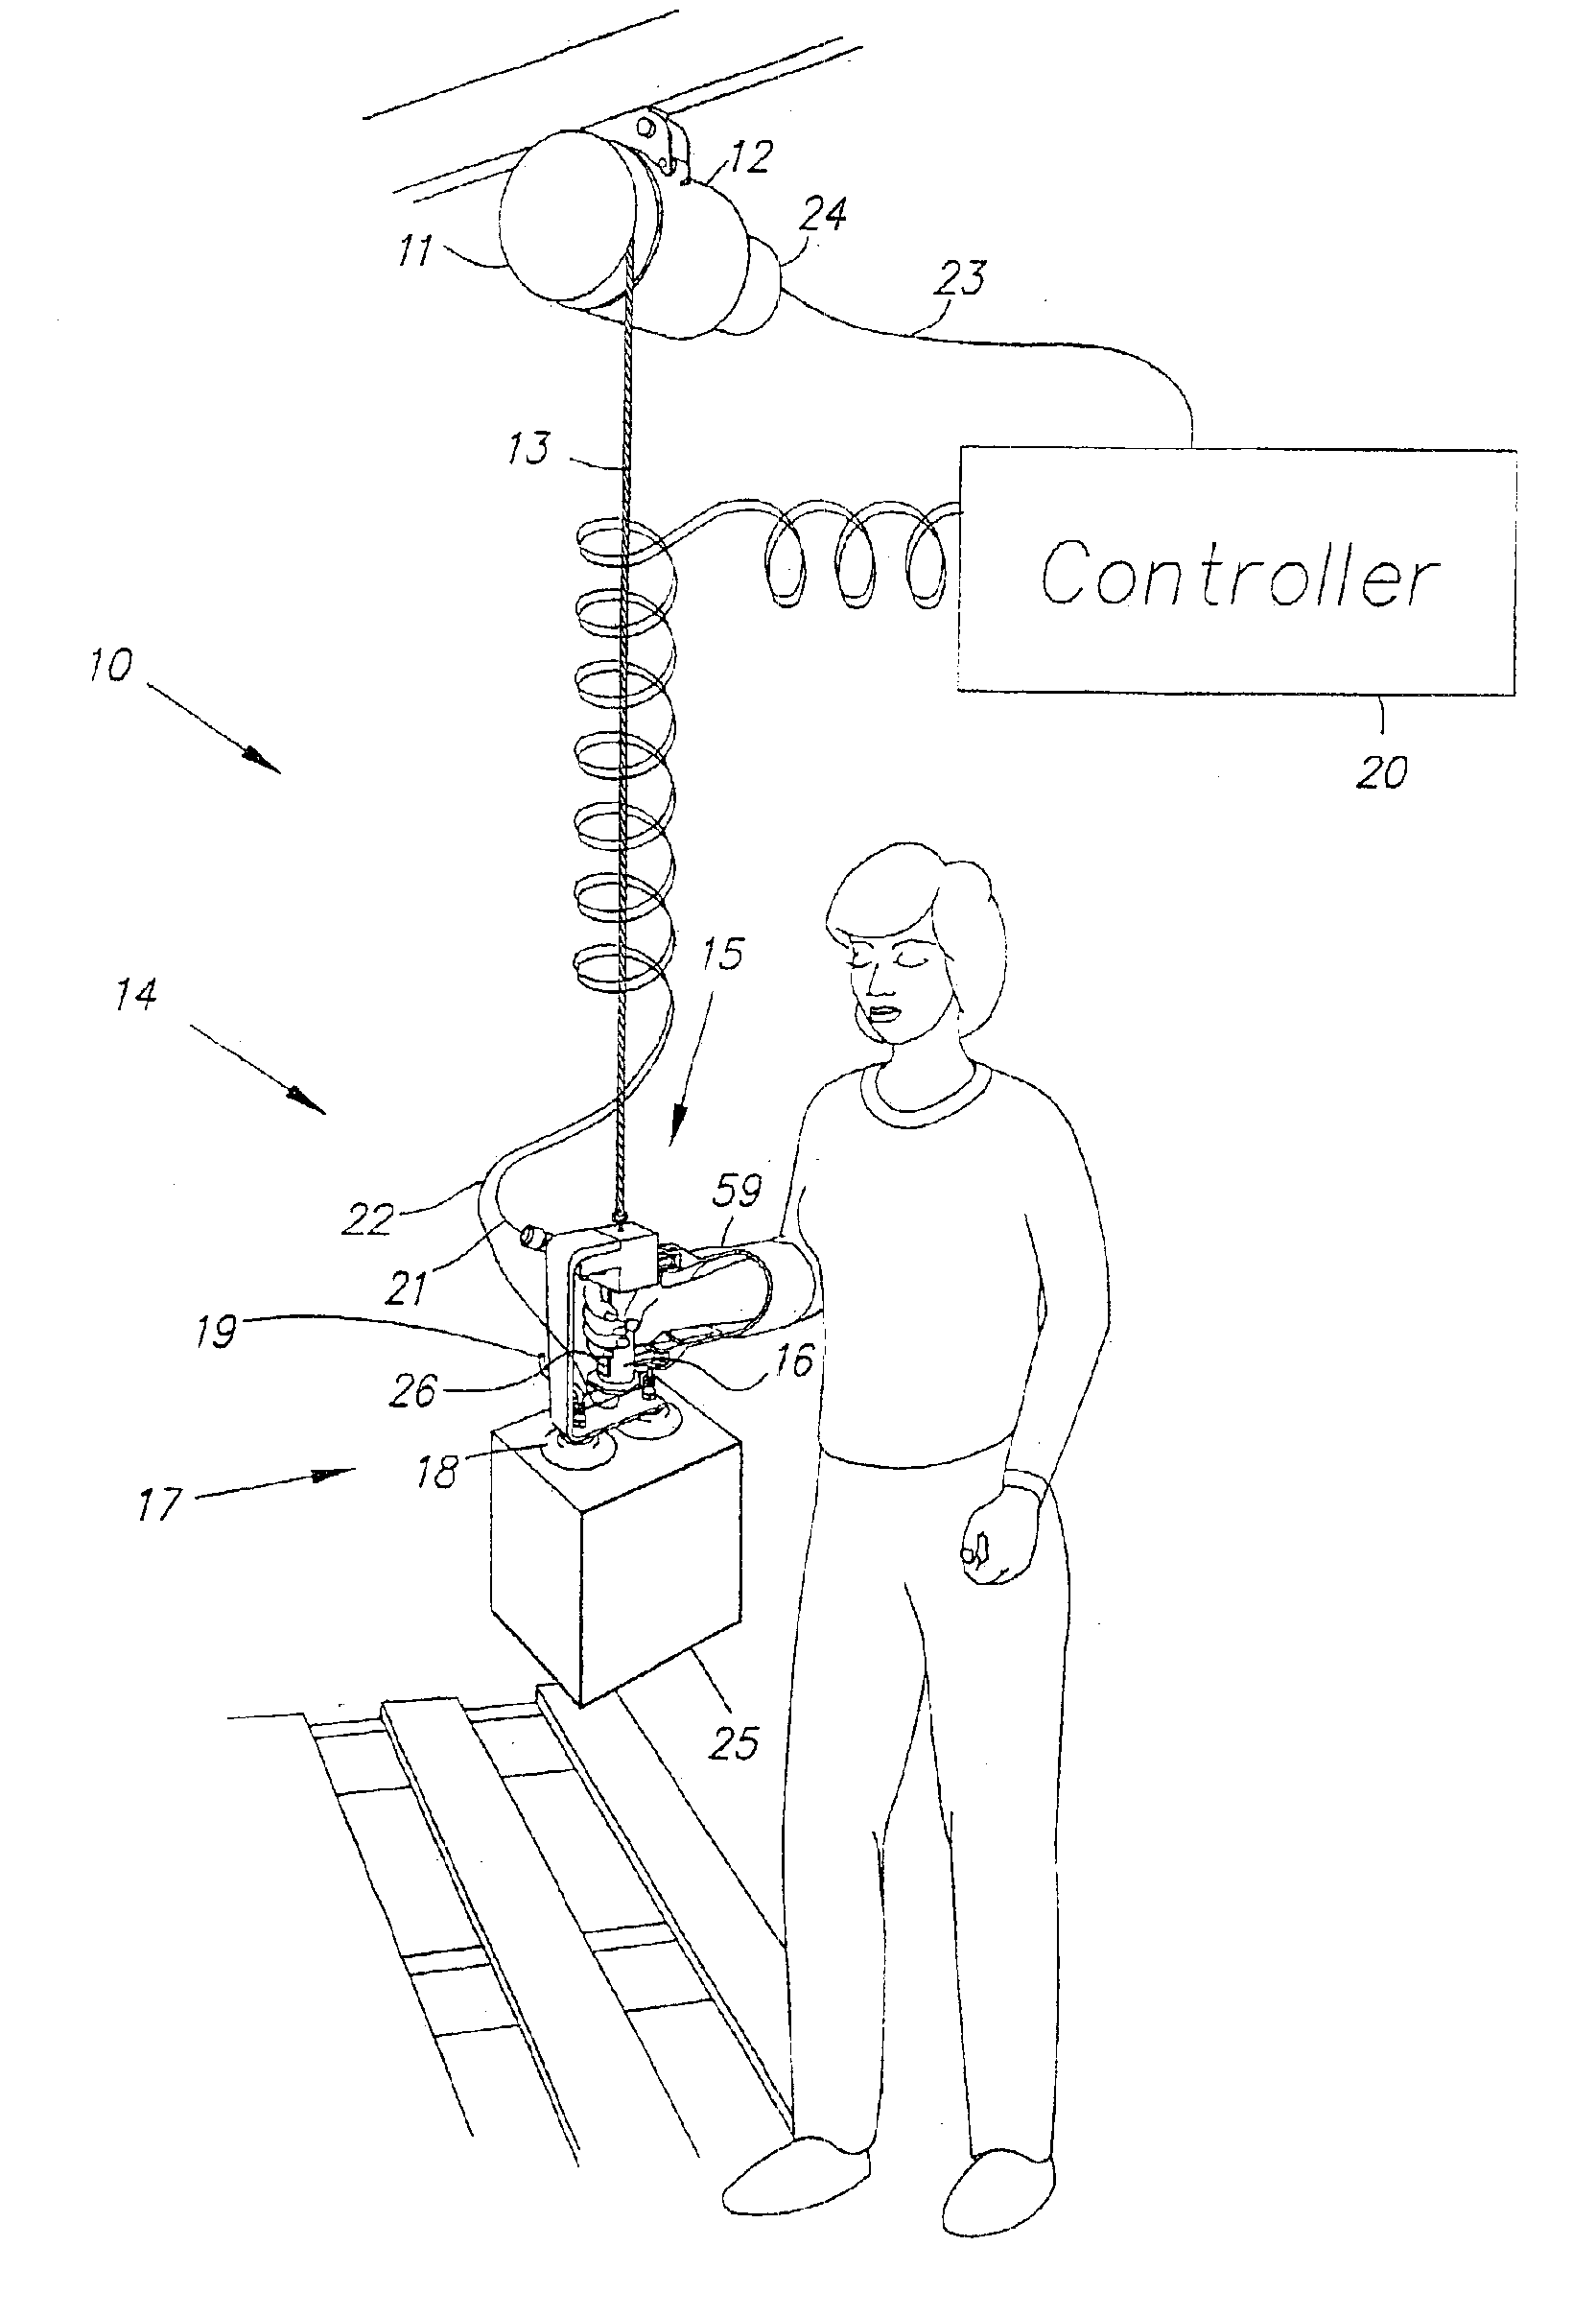 Human power amplifier for lifting load with slack prevention apparatus